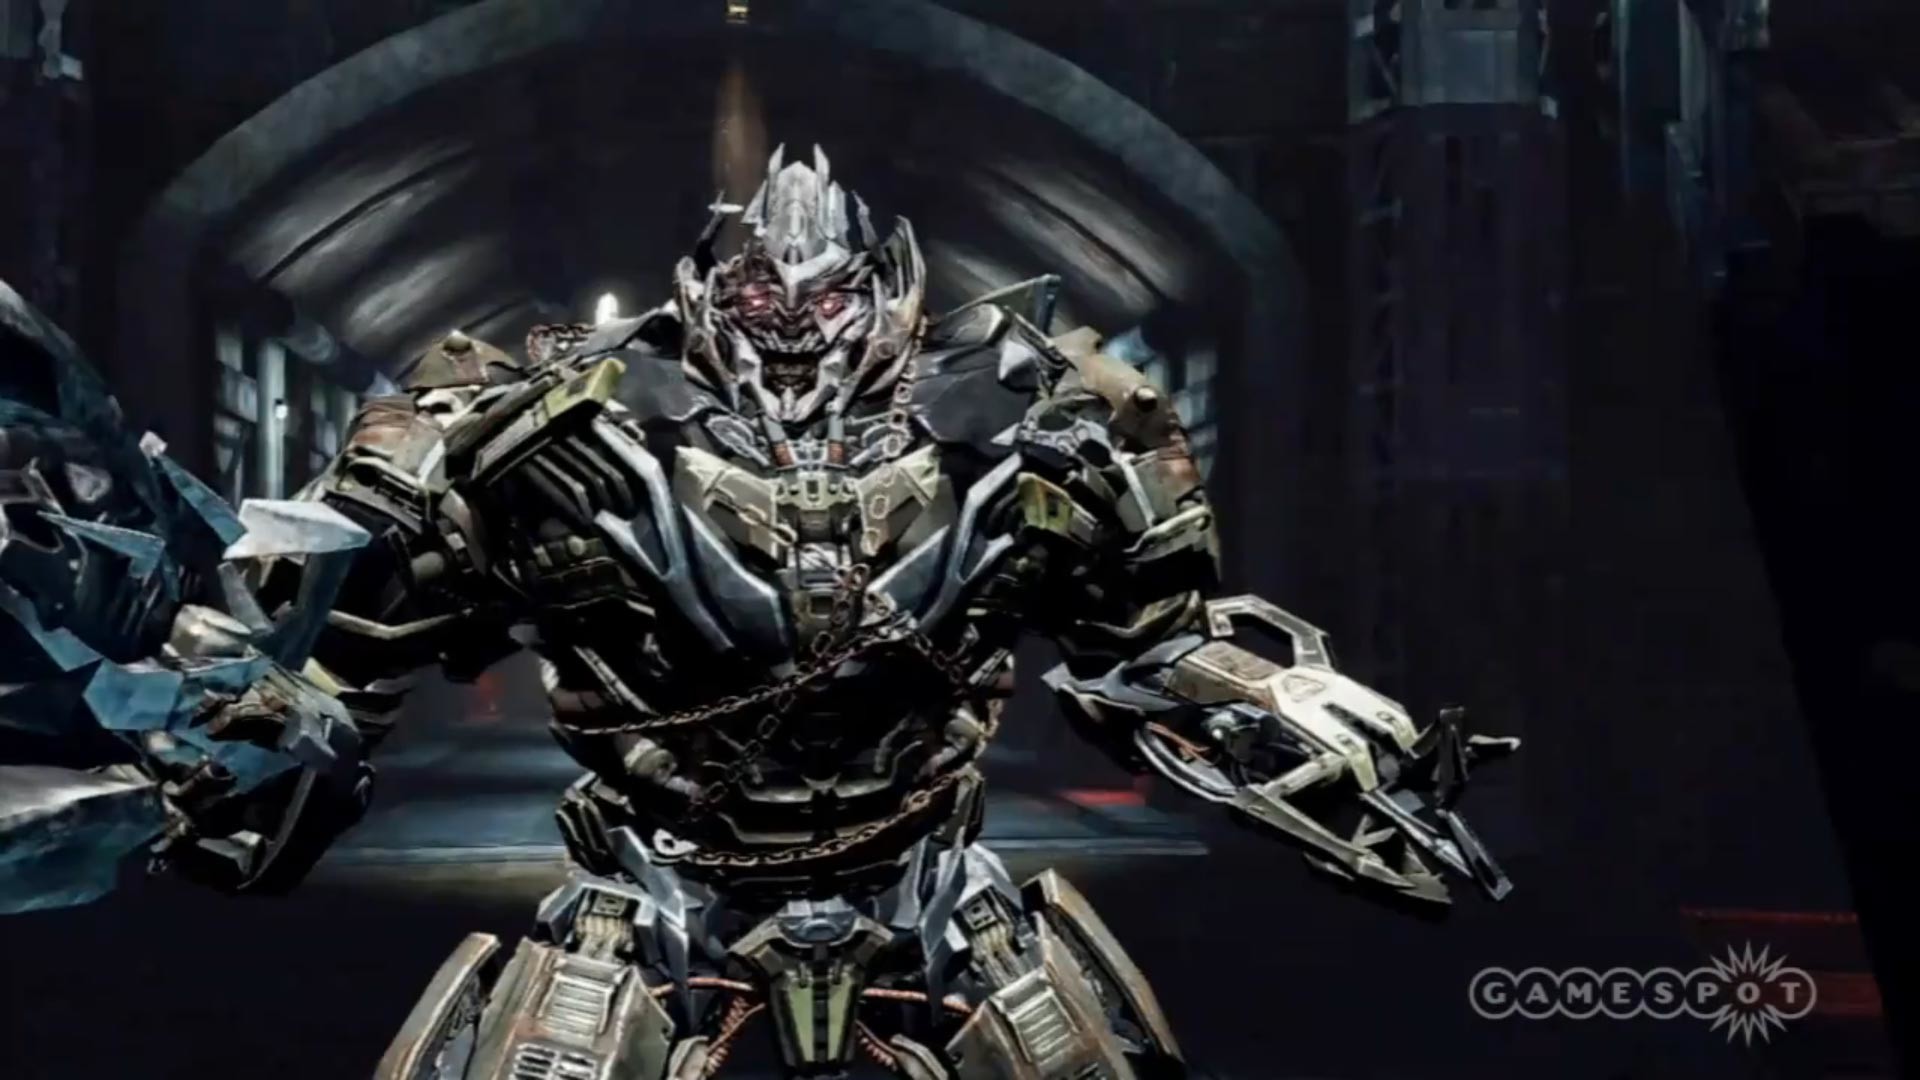 megatron hd wallpaper,action adventure game,pc game,fictional character,cg artwork,darkness